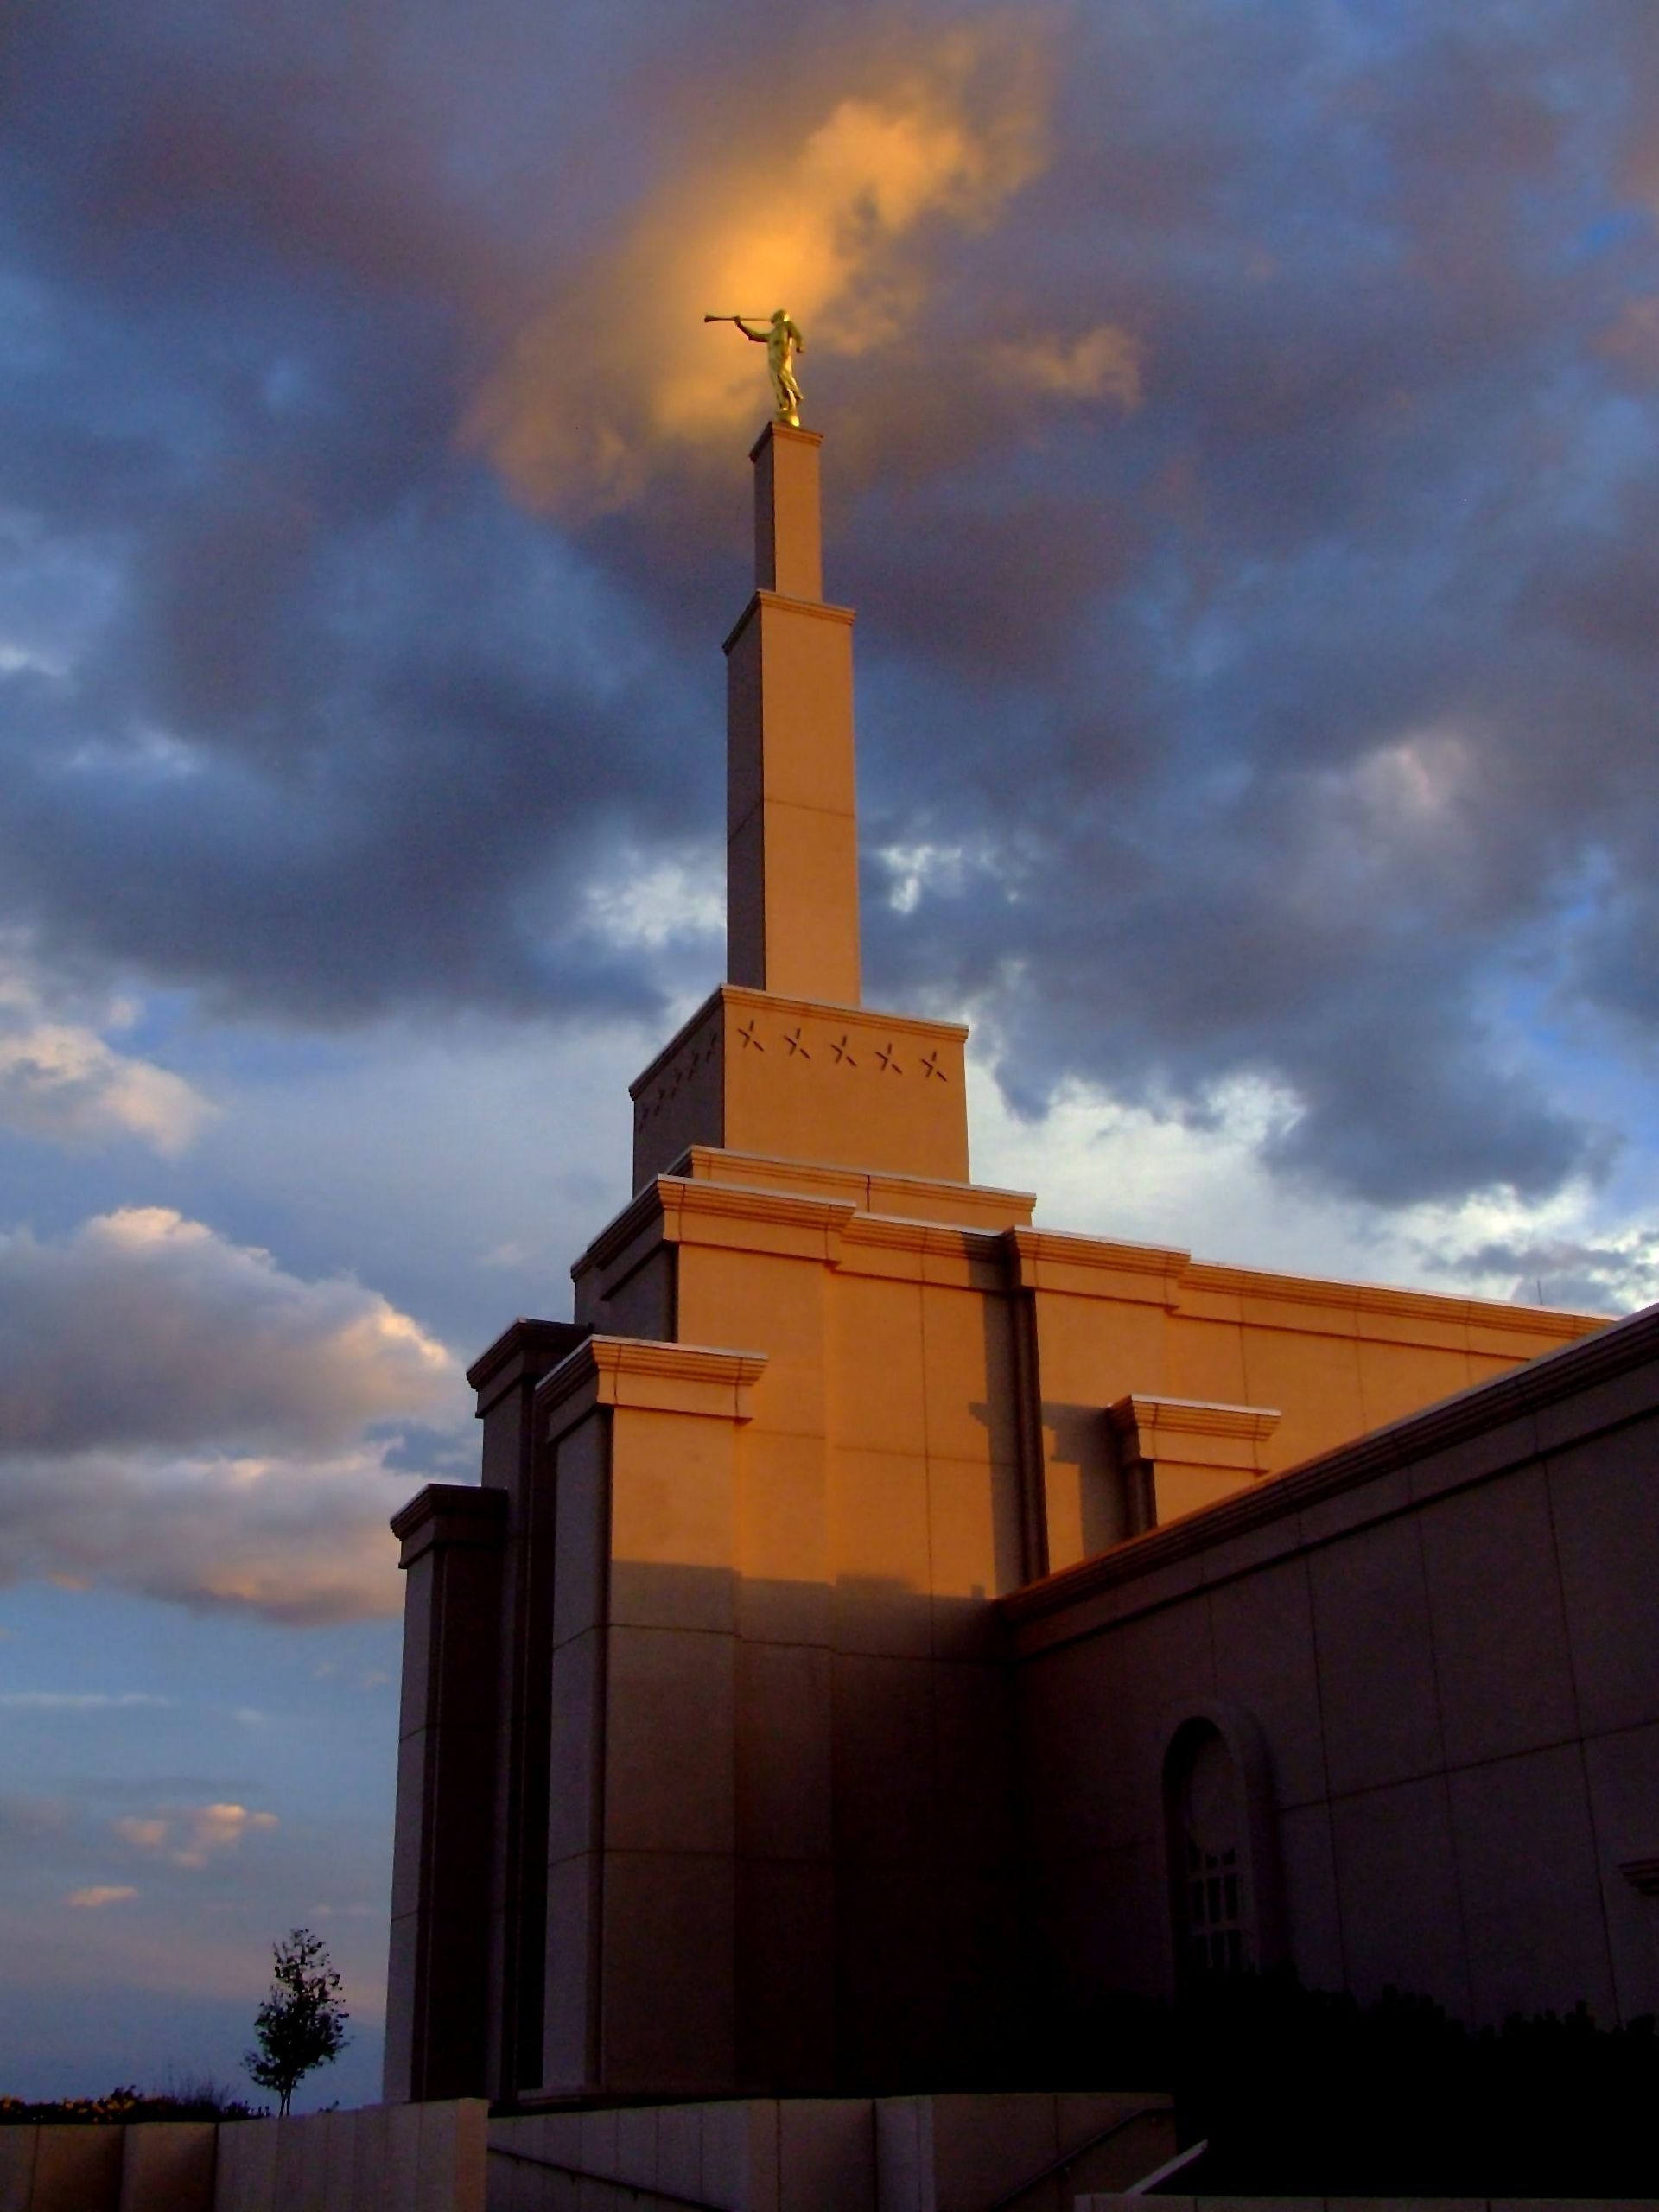 The tall spire on the Albuquerque New Mexico Temple in the evening.